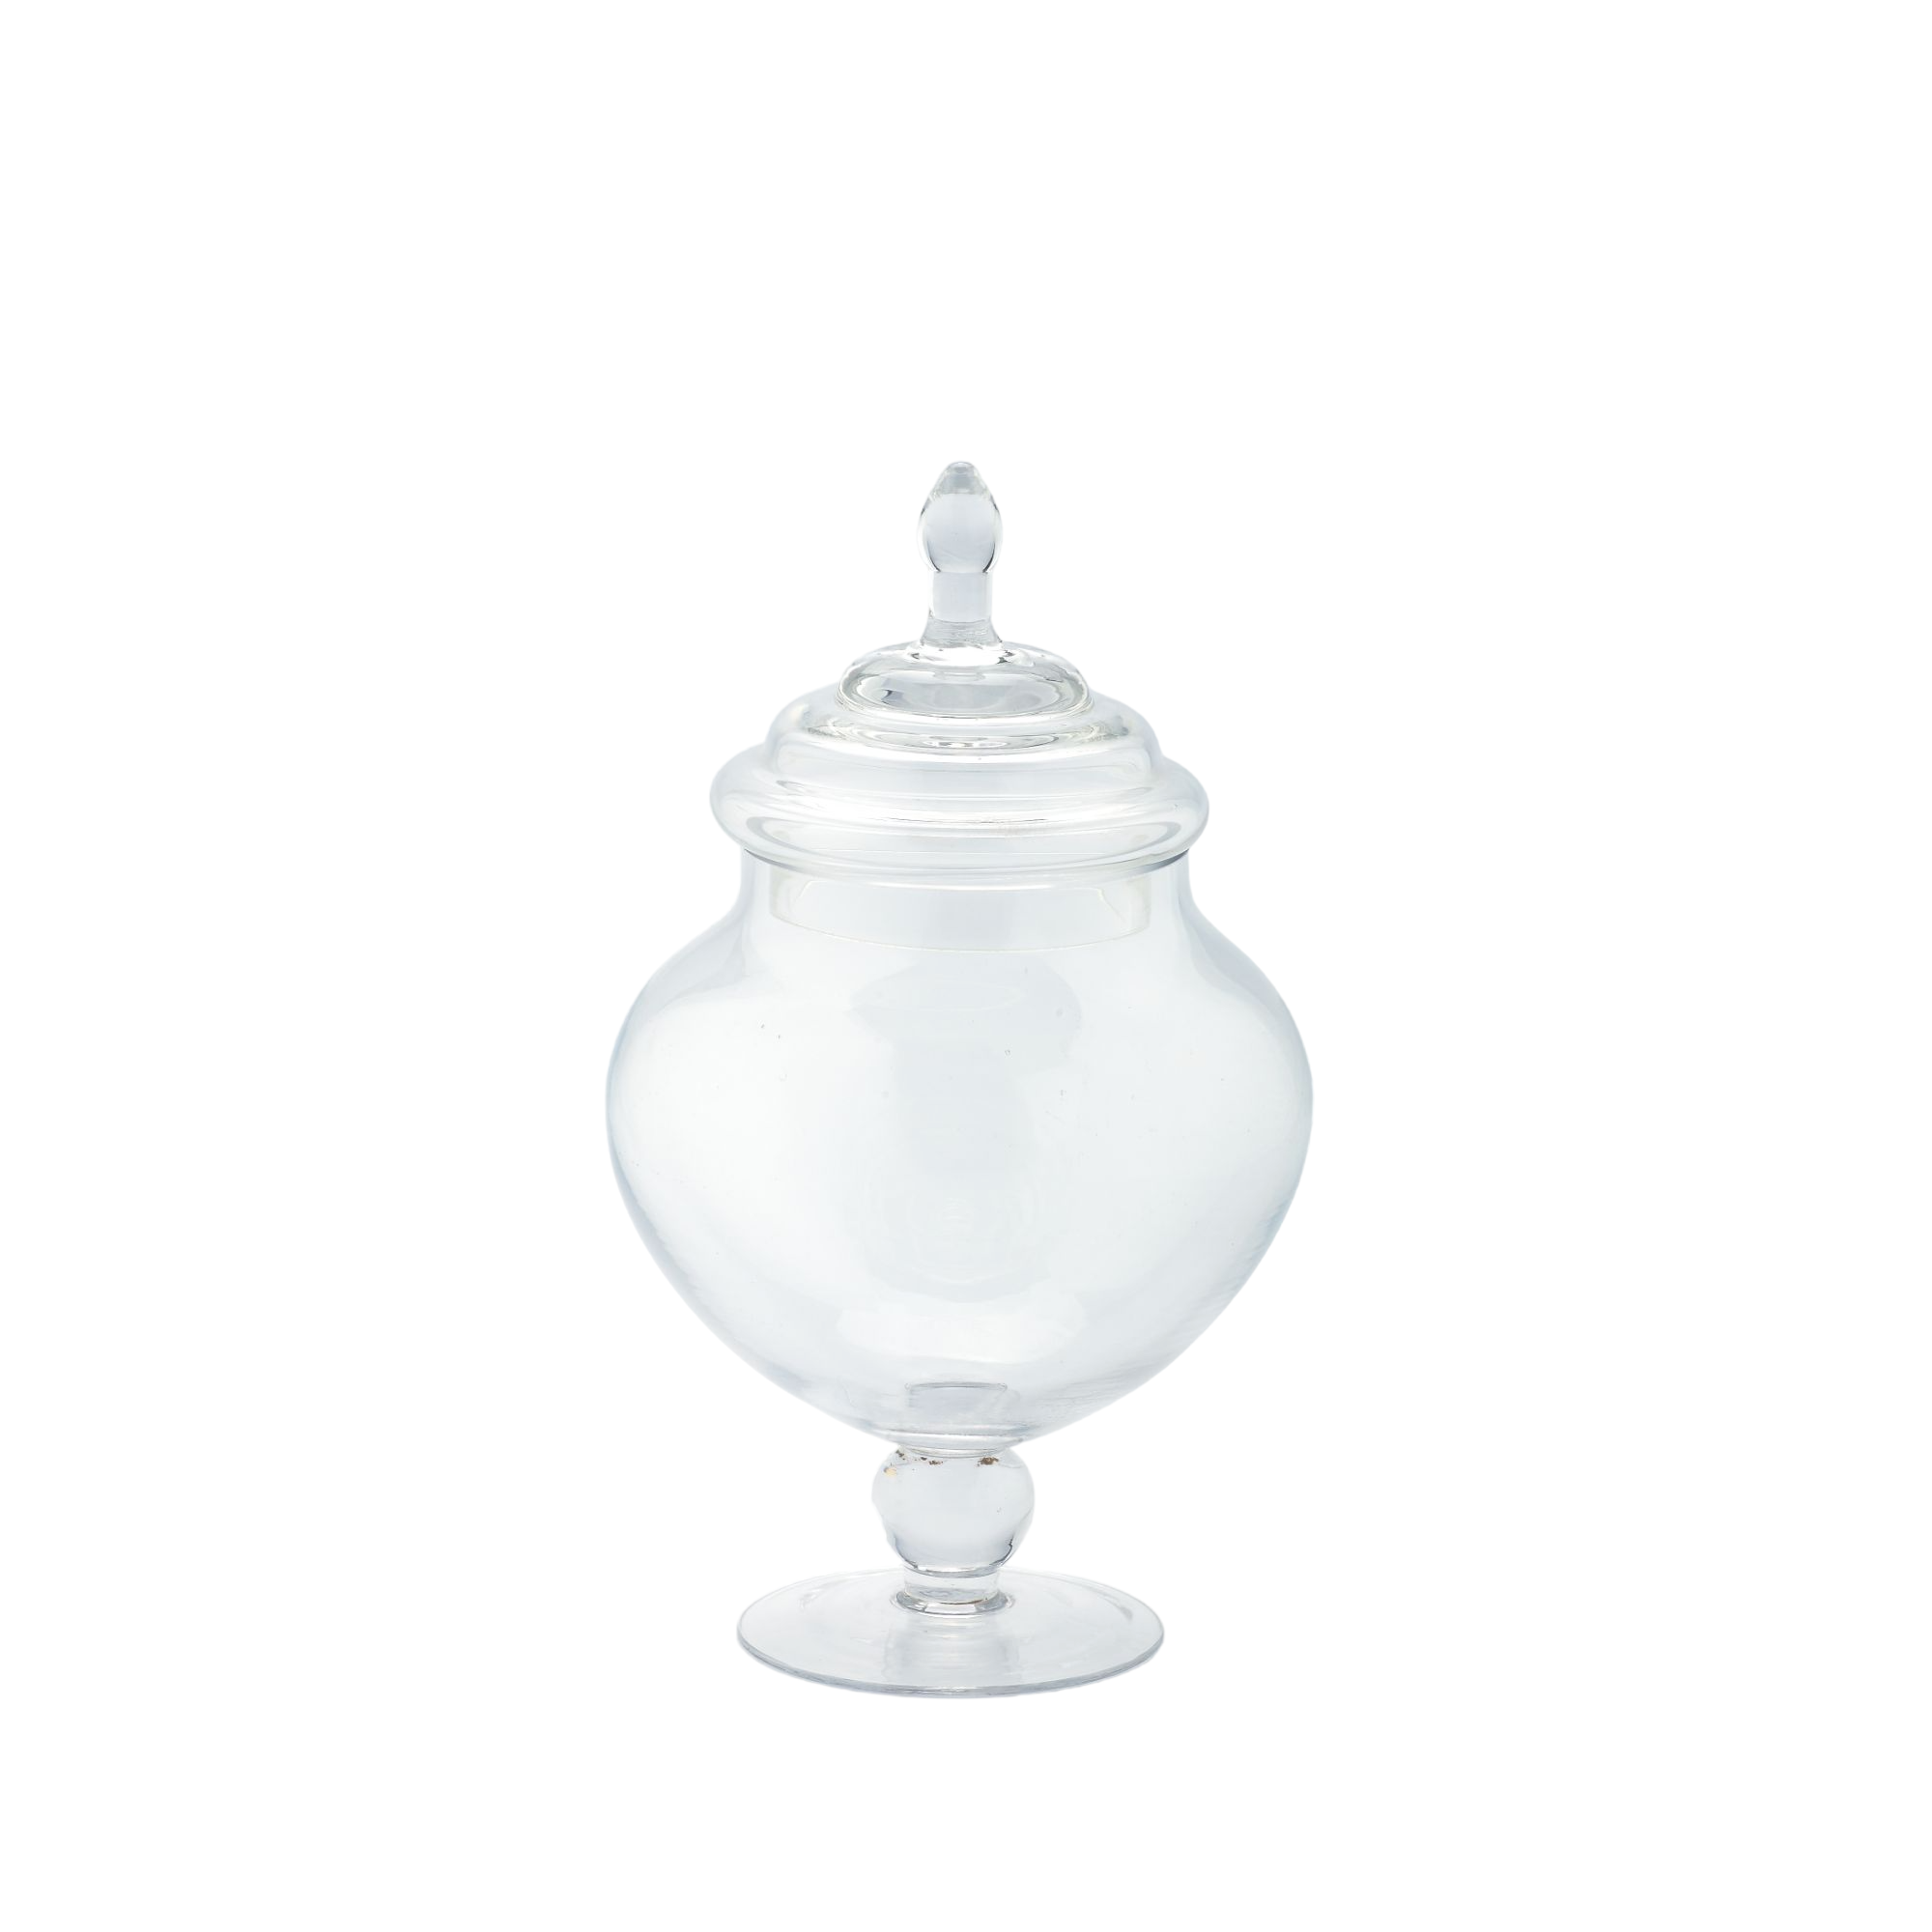 CC Home Furnishings 9" Clear Candy Dish Jar with Finial Lid